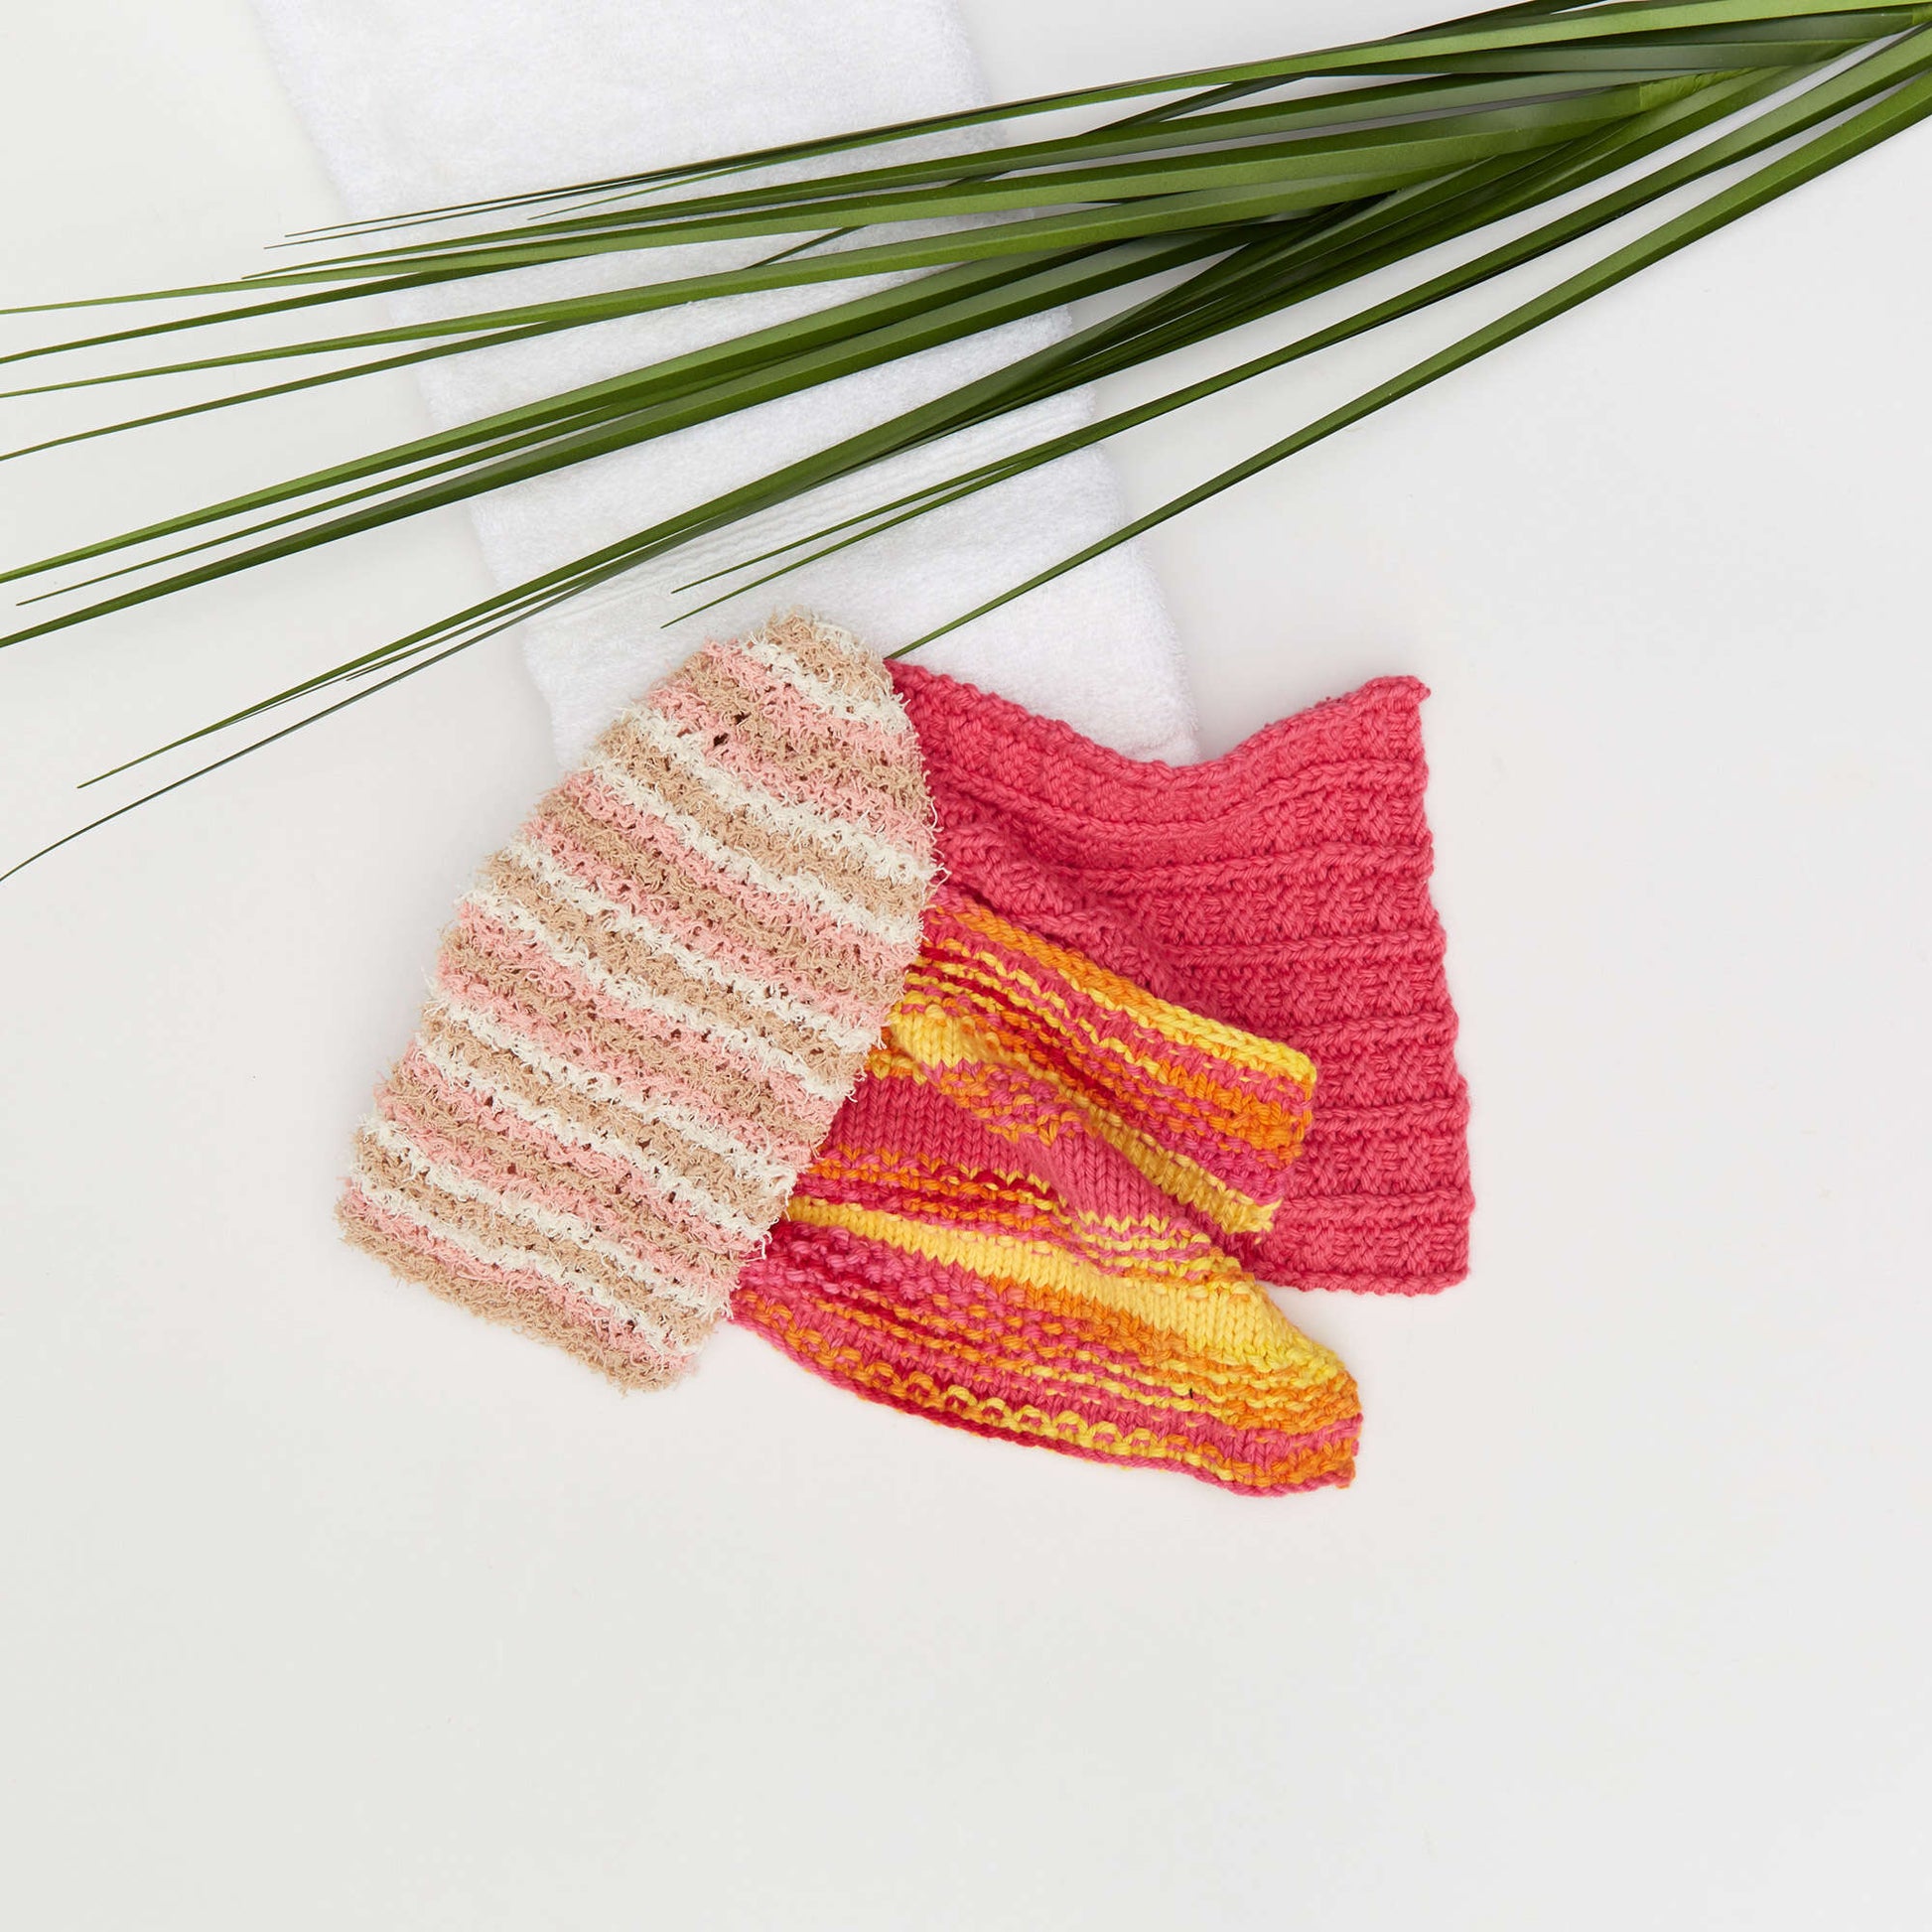 Free Red Heart Knit Textured Stripes Washcloth Pattern